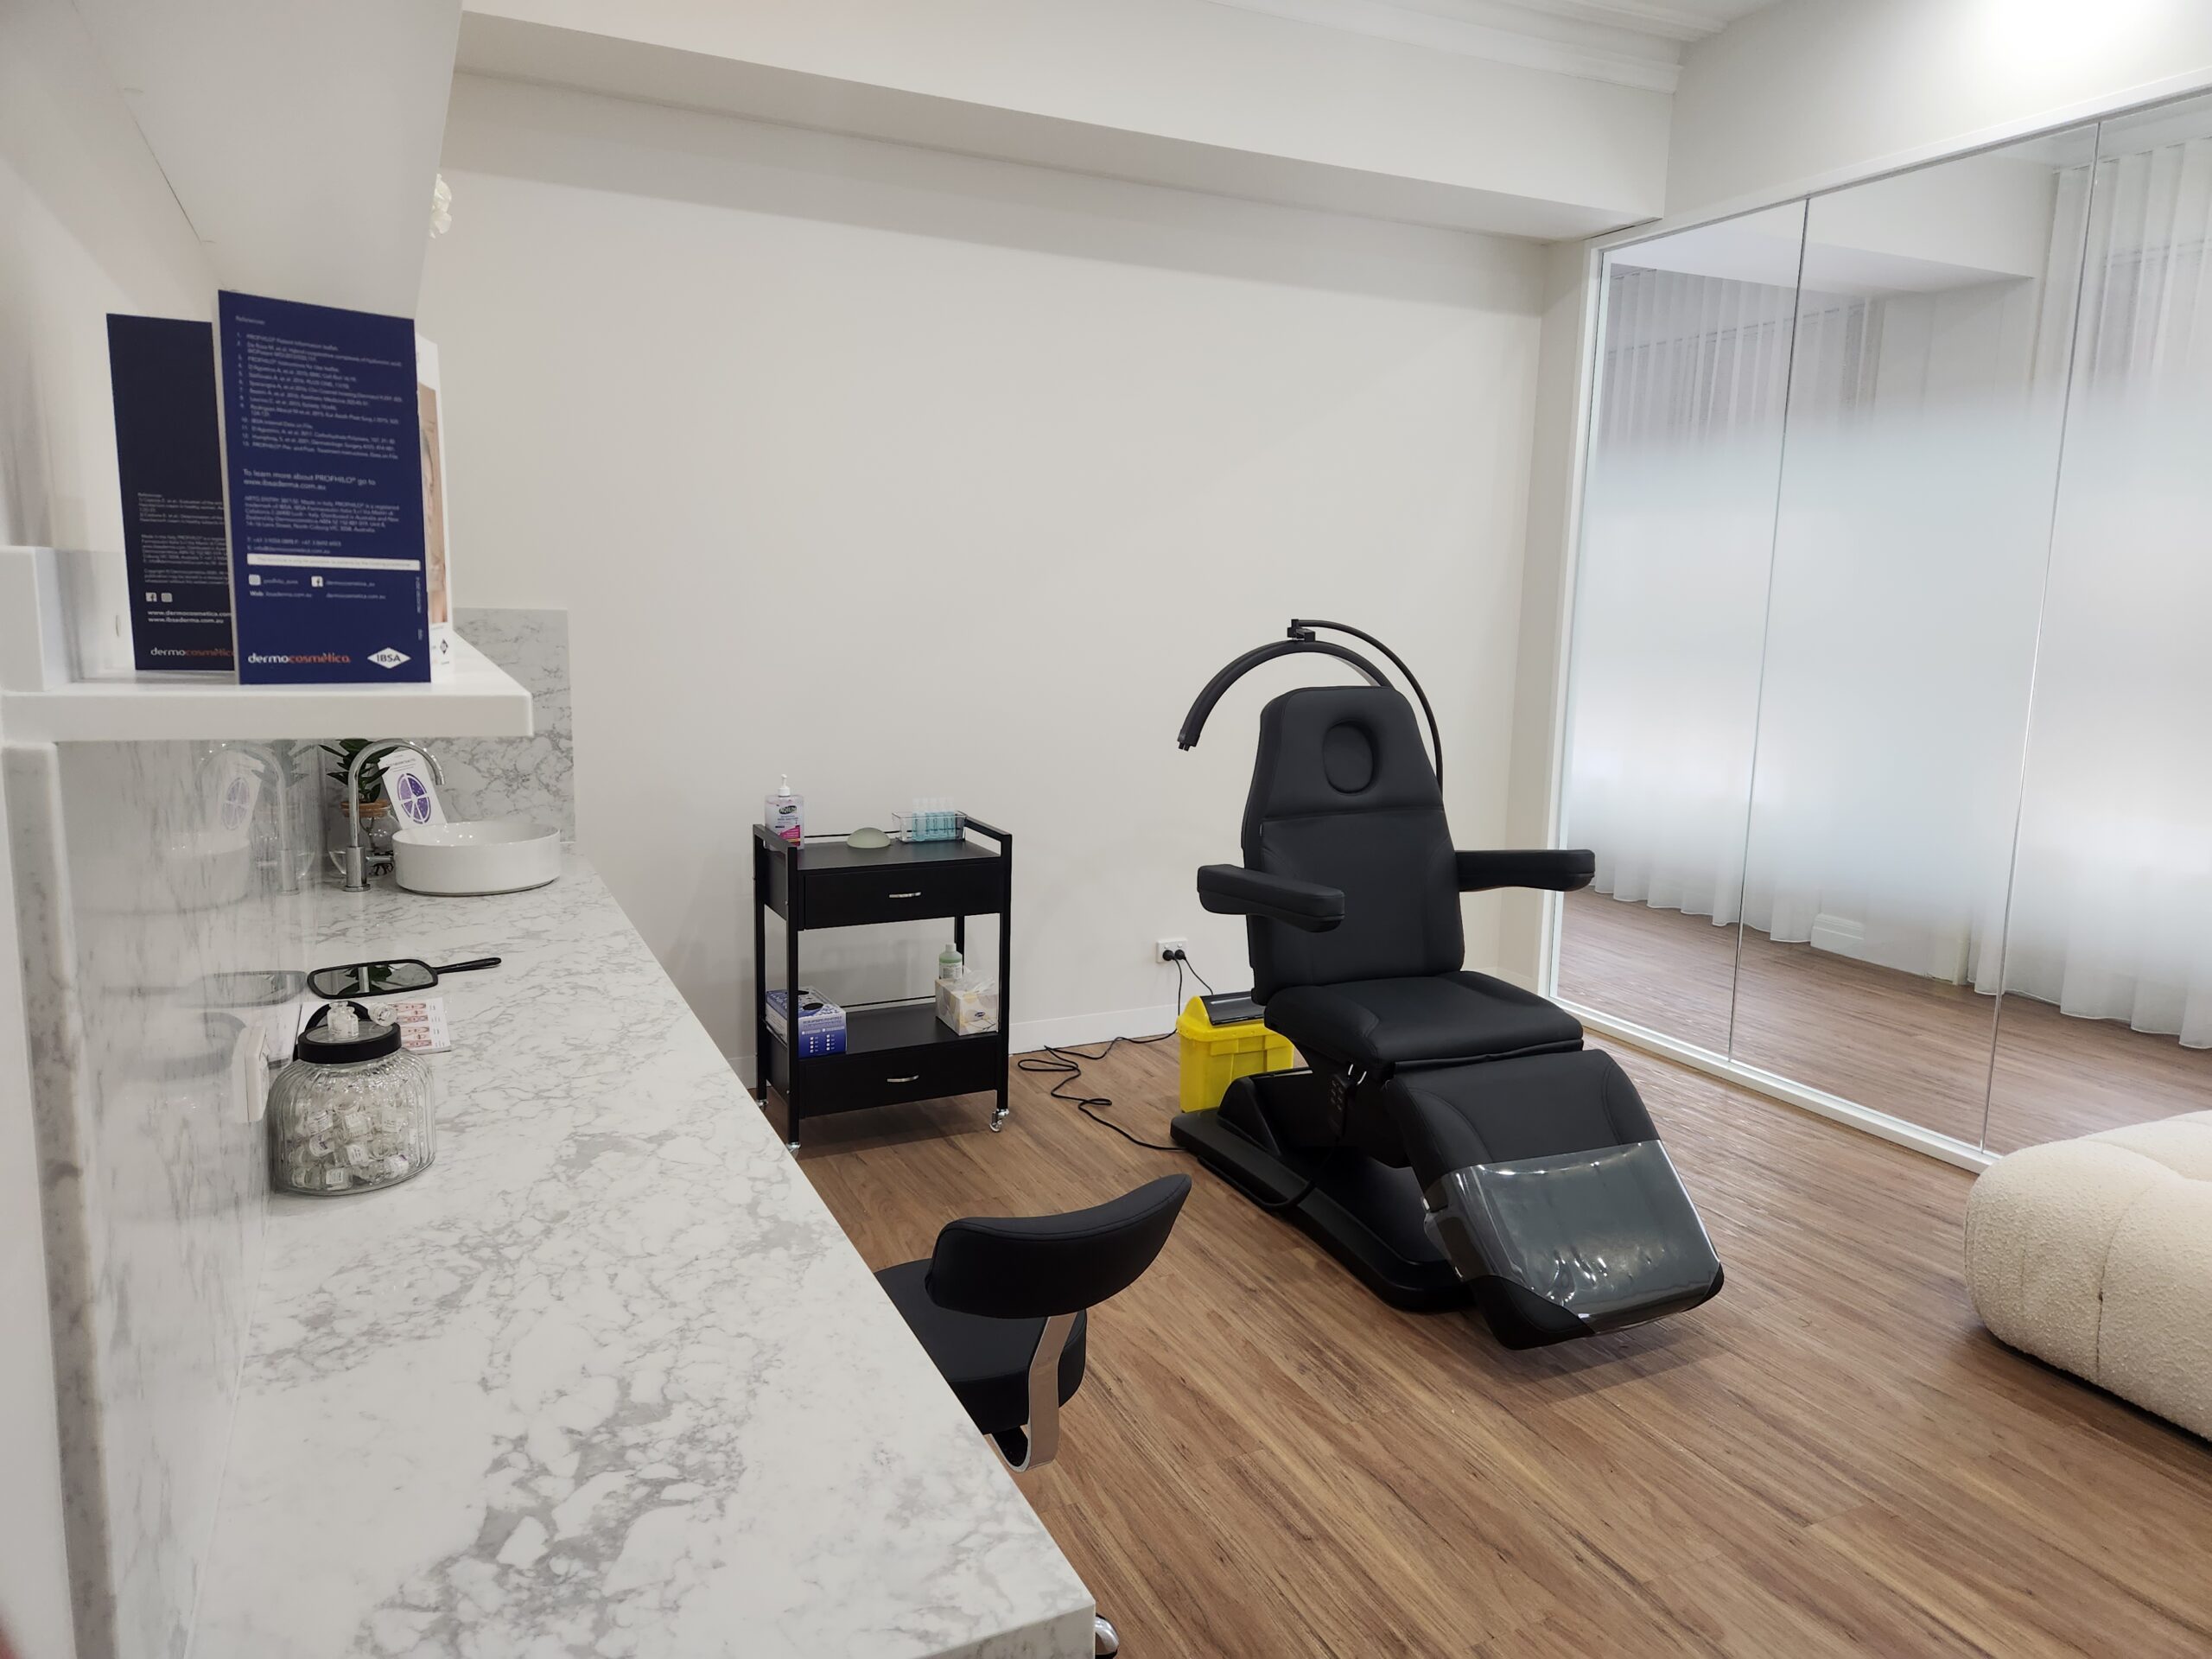 Treatment room for a skin clinic. The fit-out includes stone benchtops and a chair for patients.